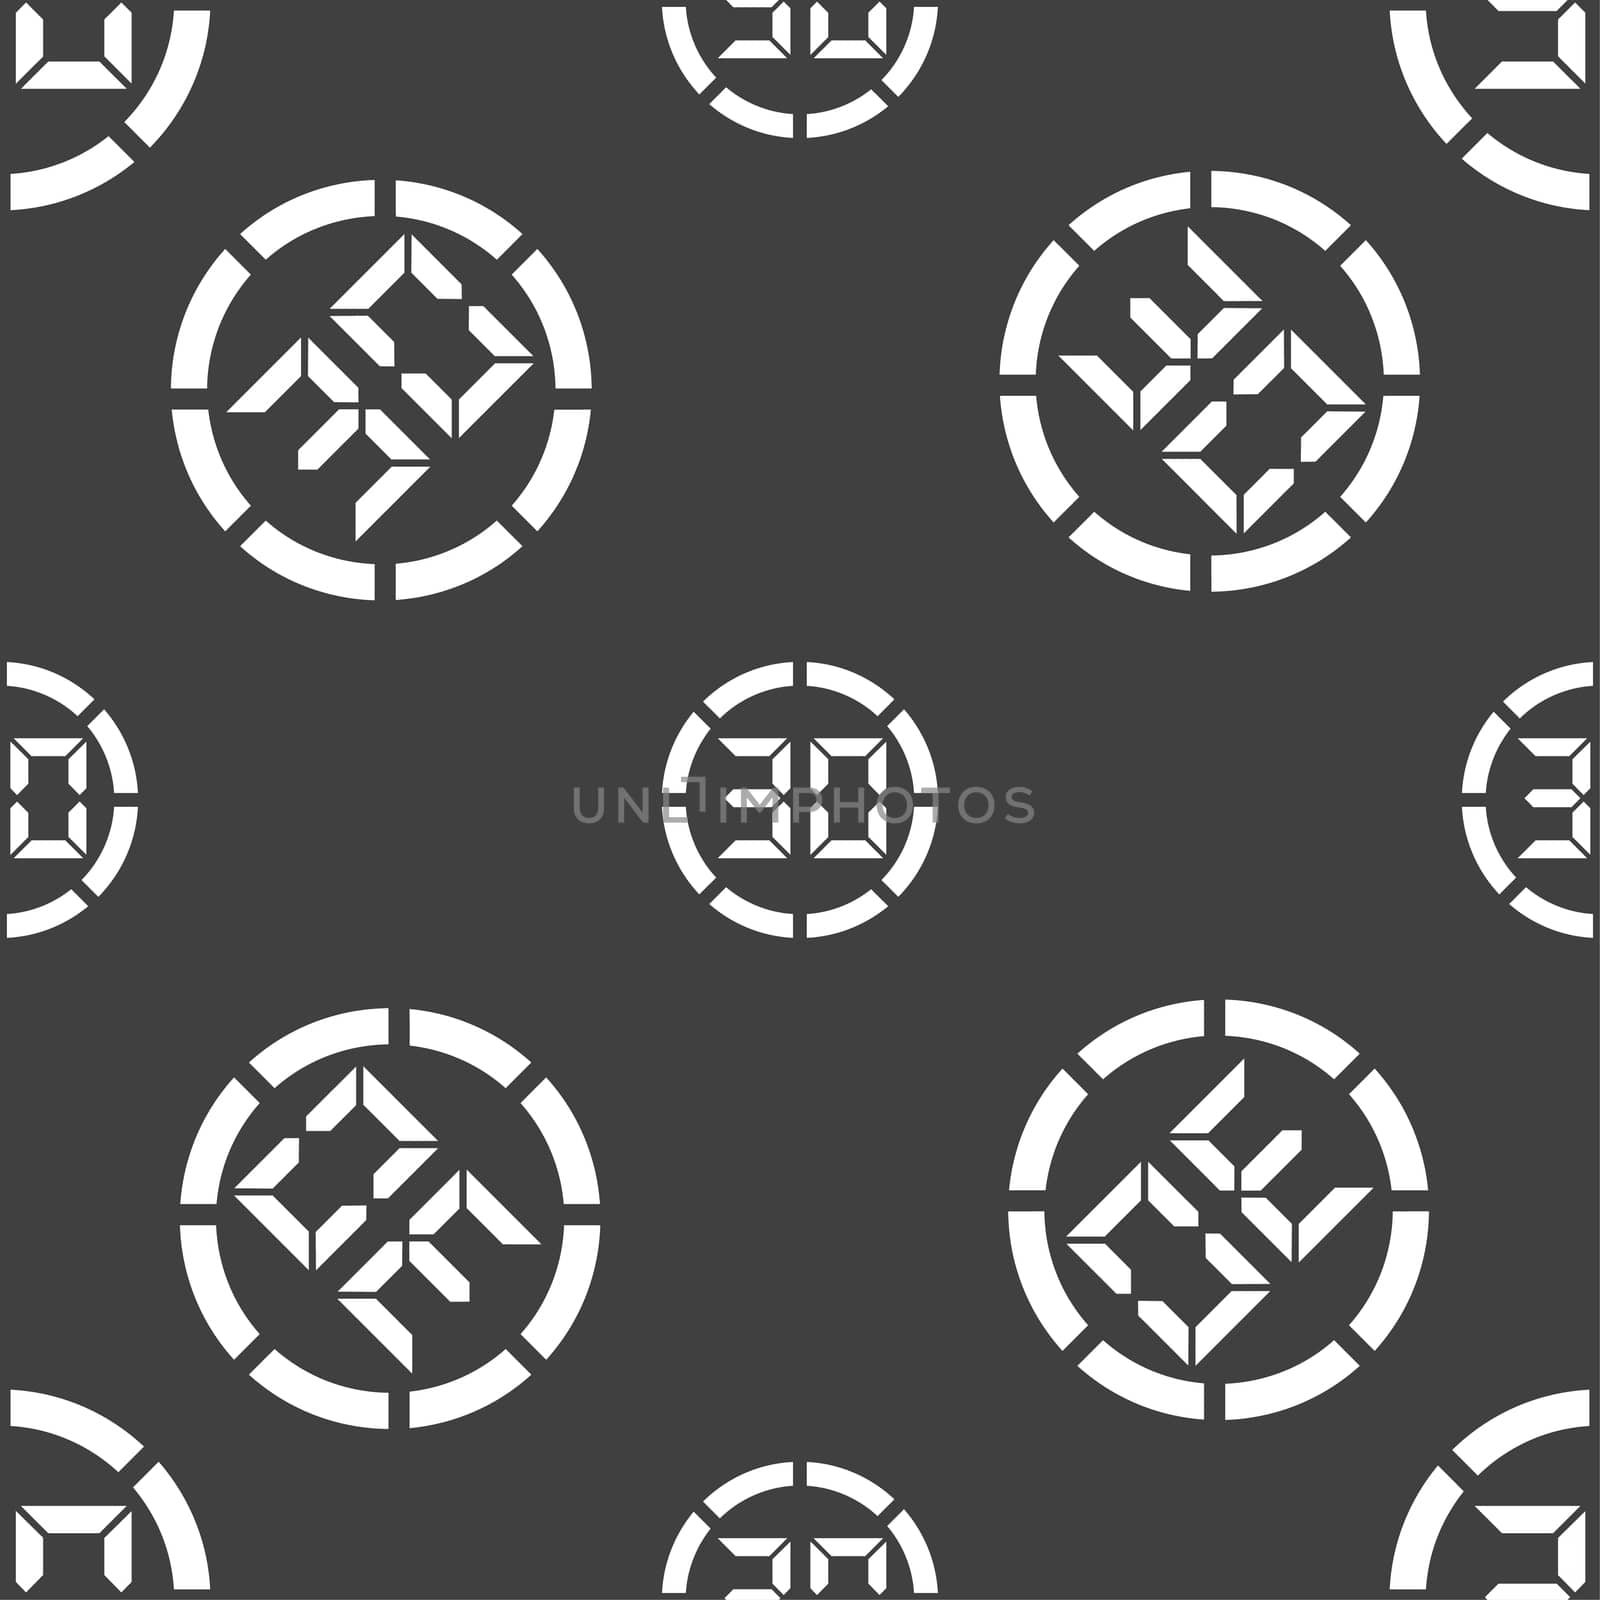 30 second stopwatch icon sign. Seamless pattern on a gray background. illustration